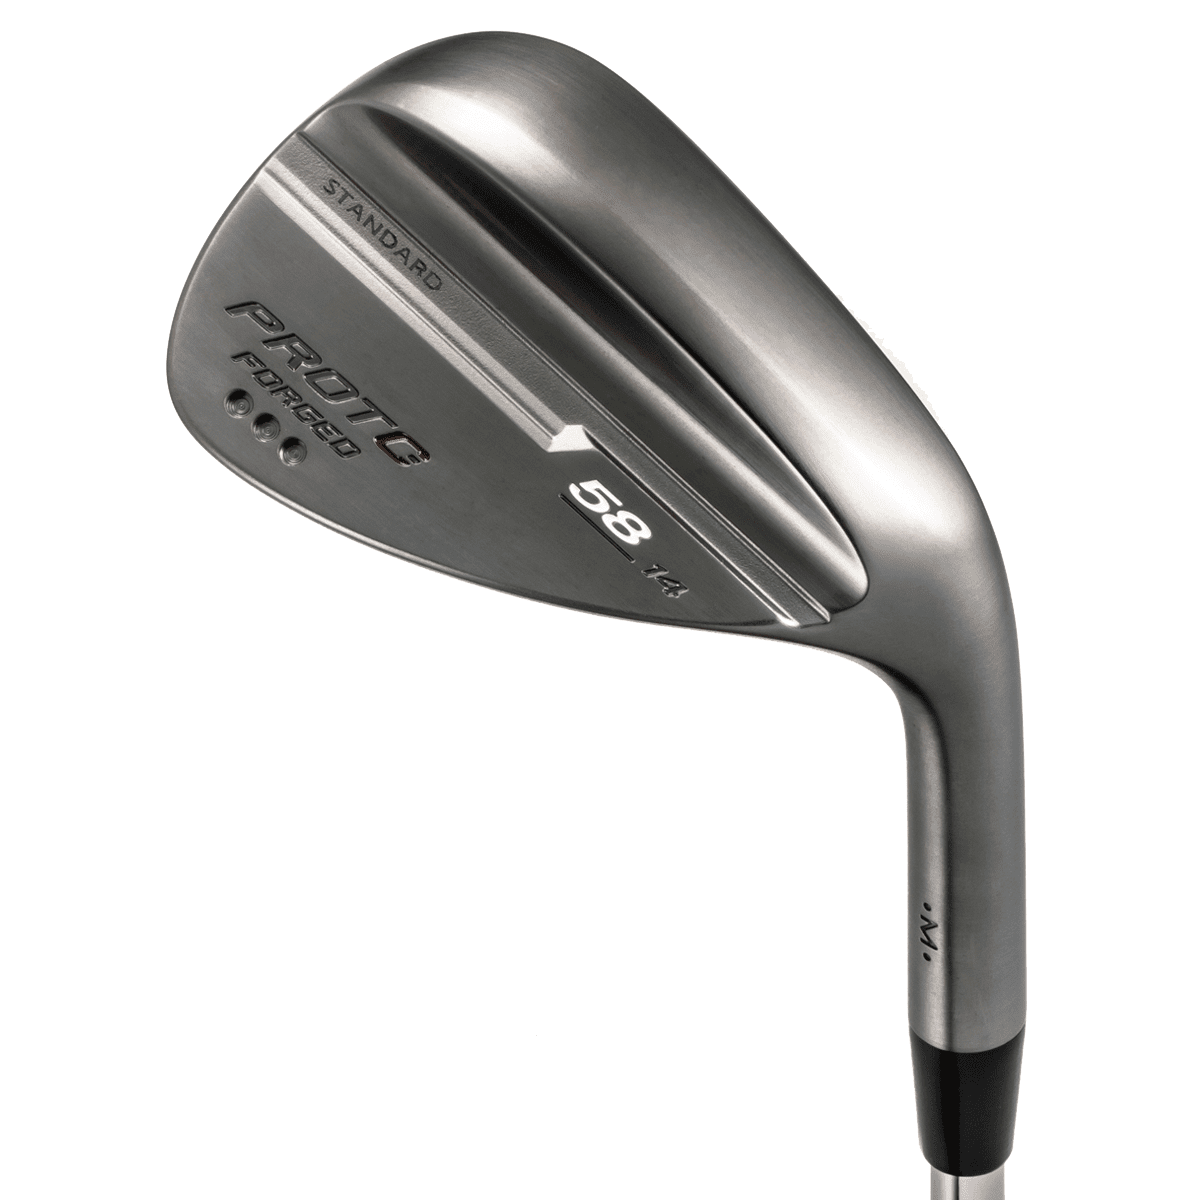 PROTOCONCEPT Golf, Forged Wedge - 45